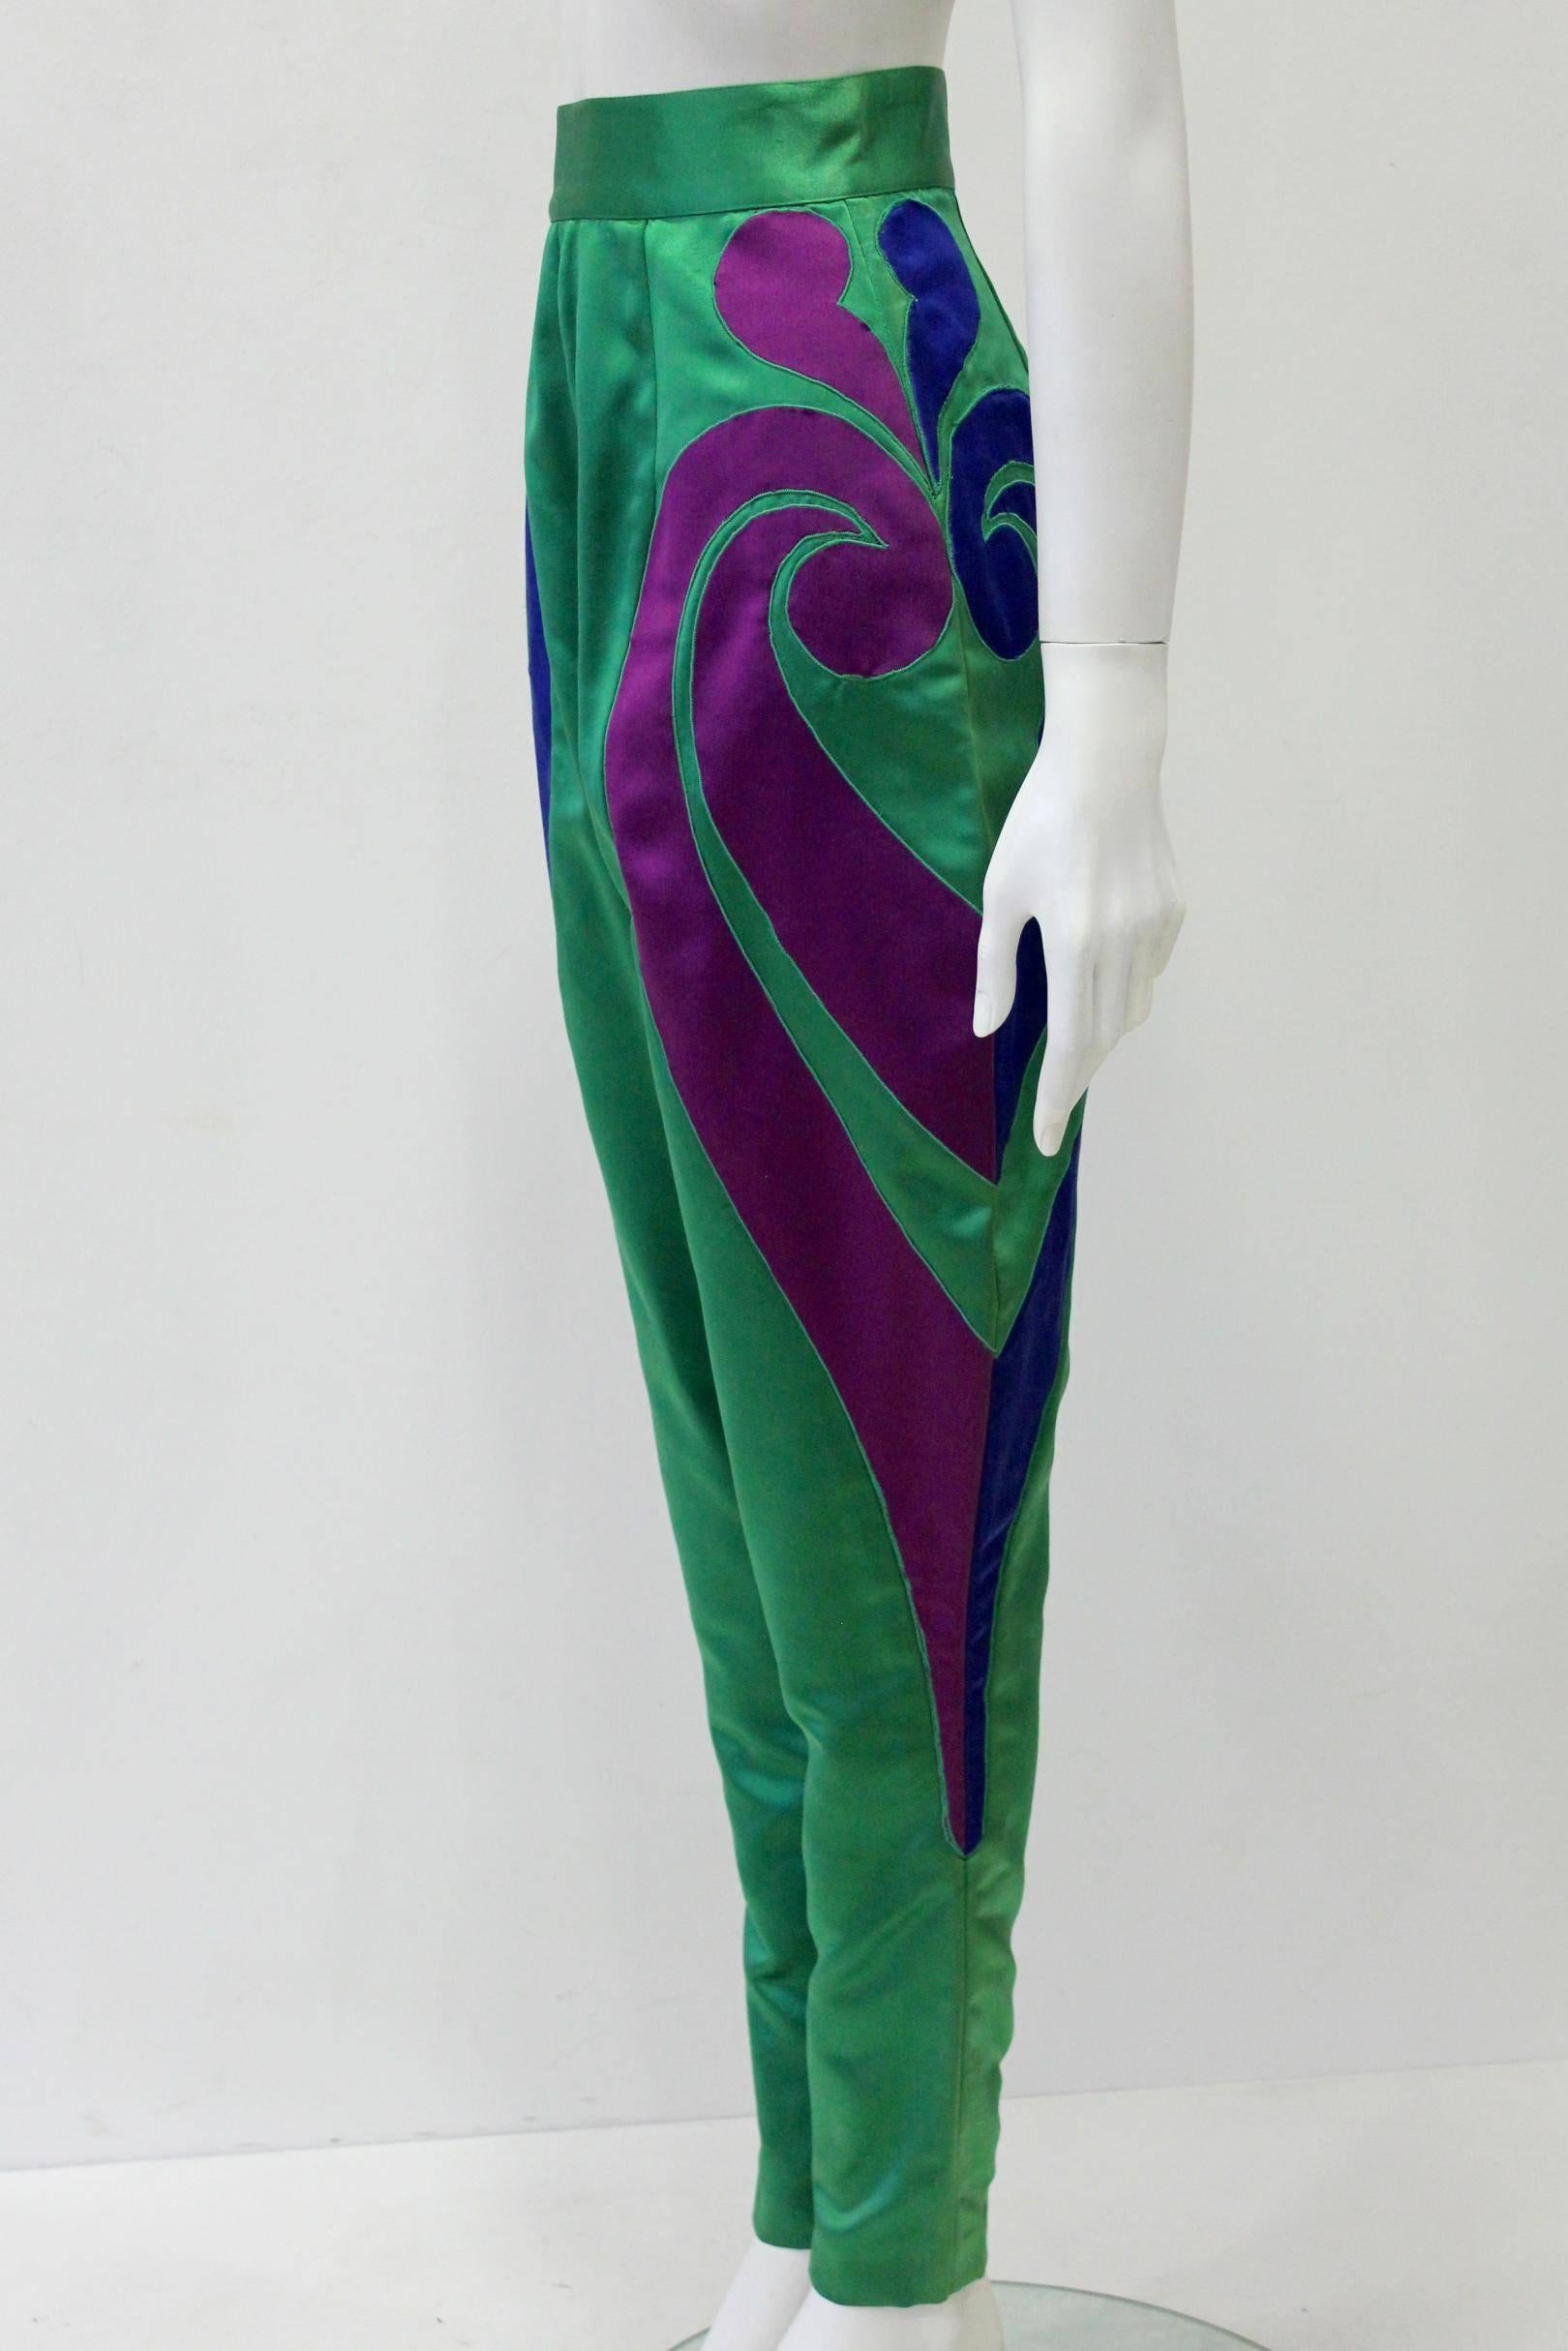 Blue One Of A Kind Gianni Versace Silk Applique Jodhpurs Spring 1990 For Sale